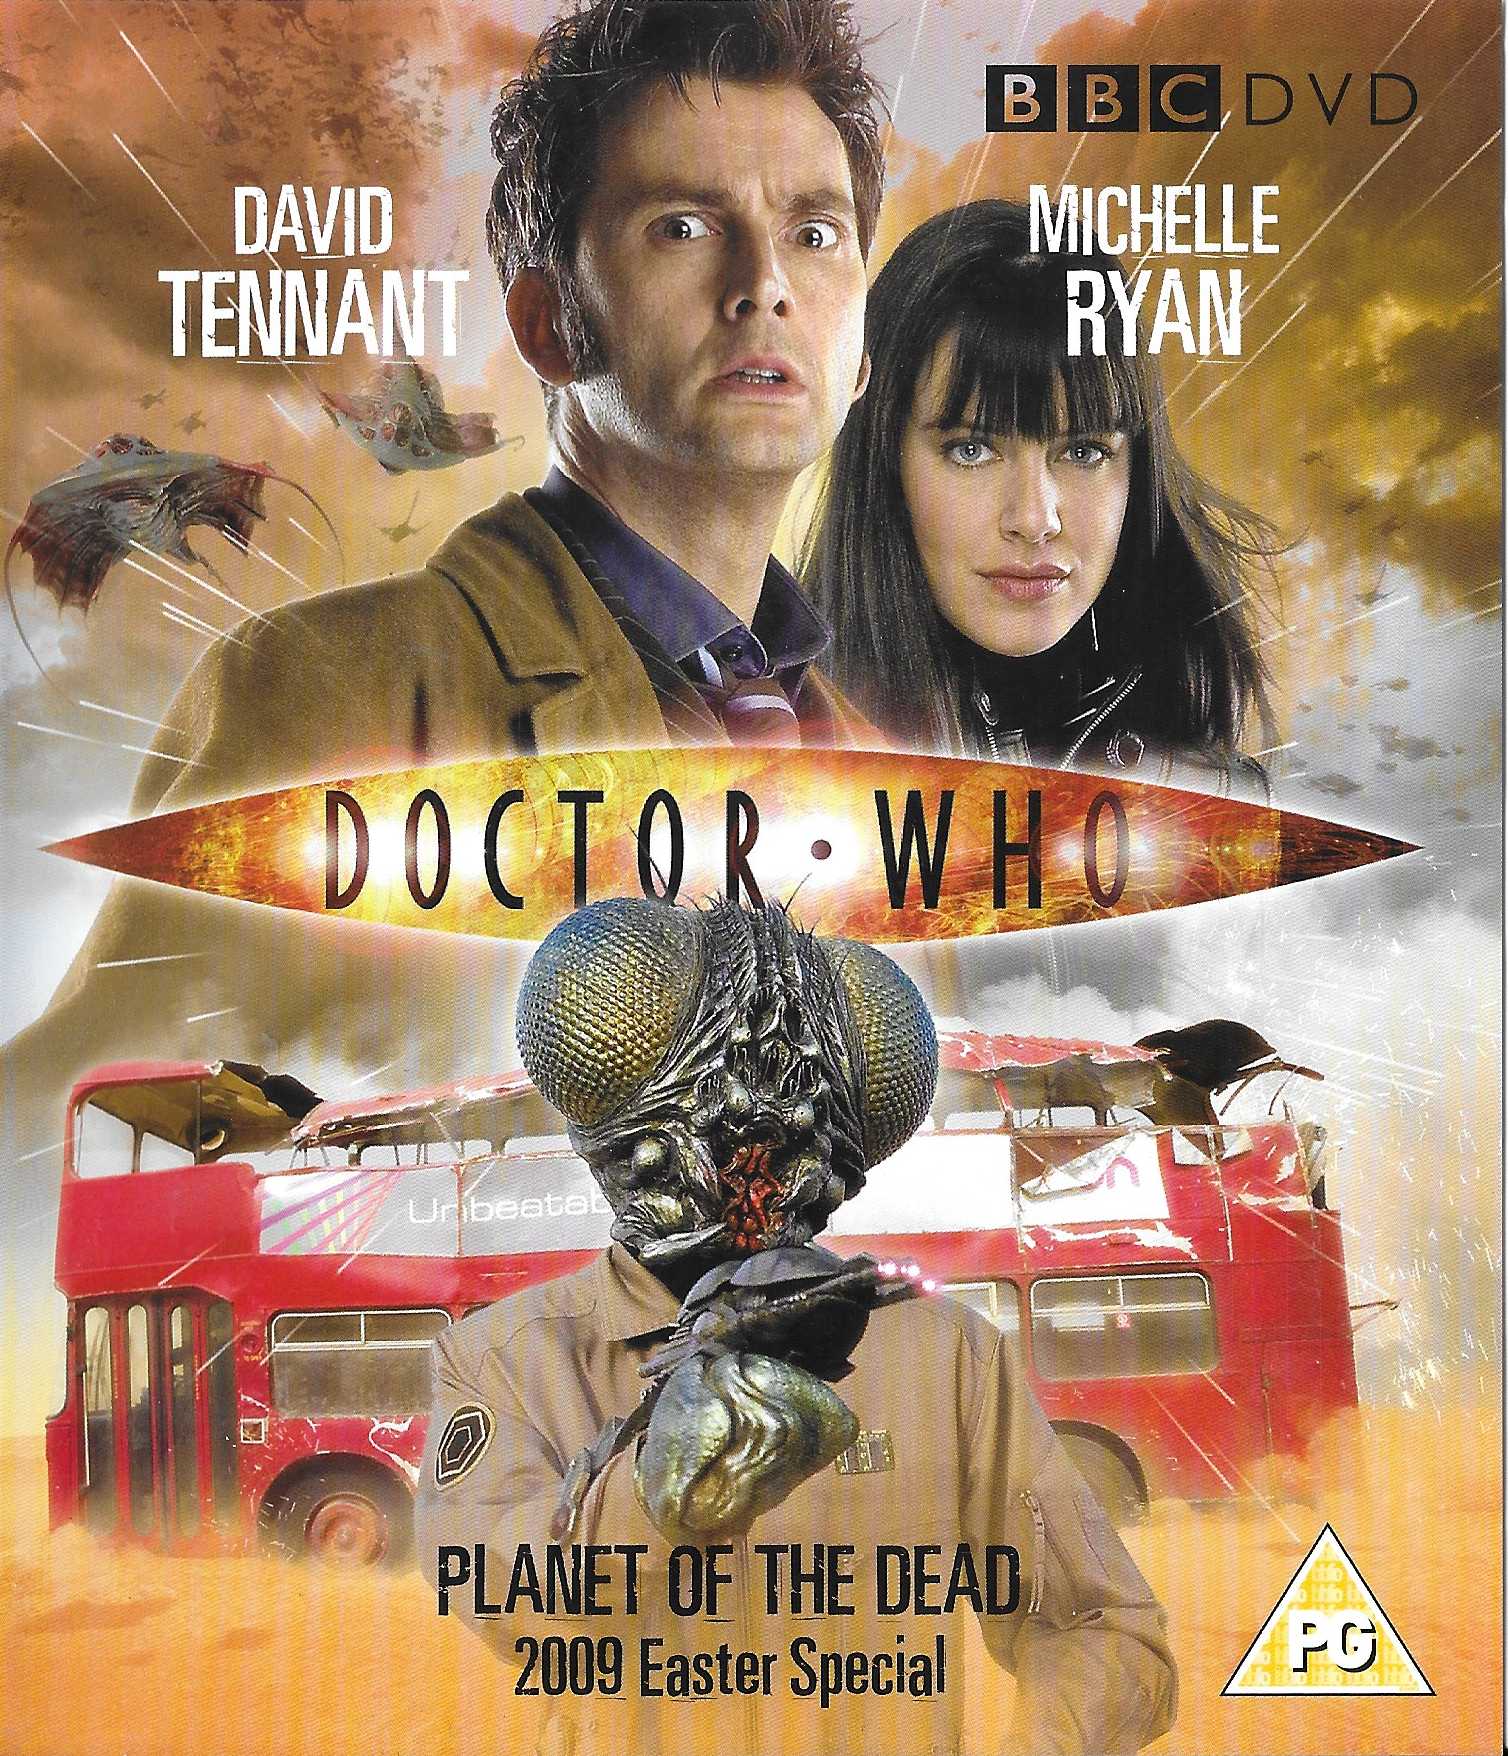 Picture of BBCBD 0053 Doctor Who - Planet of the dead by artist Russell T Davies / Gareth Roberts from the BBC records and Tapes library